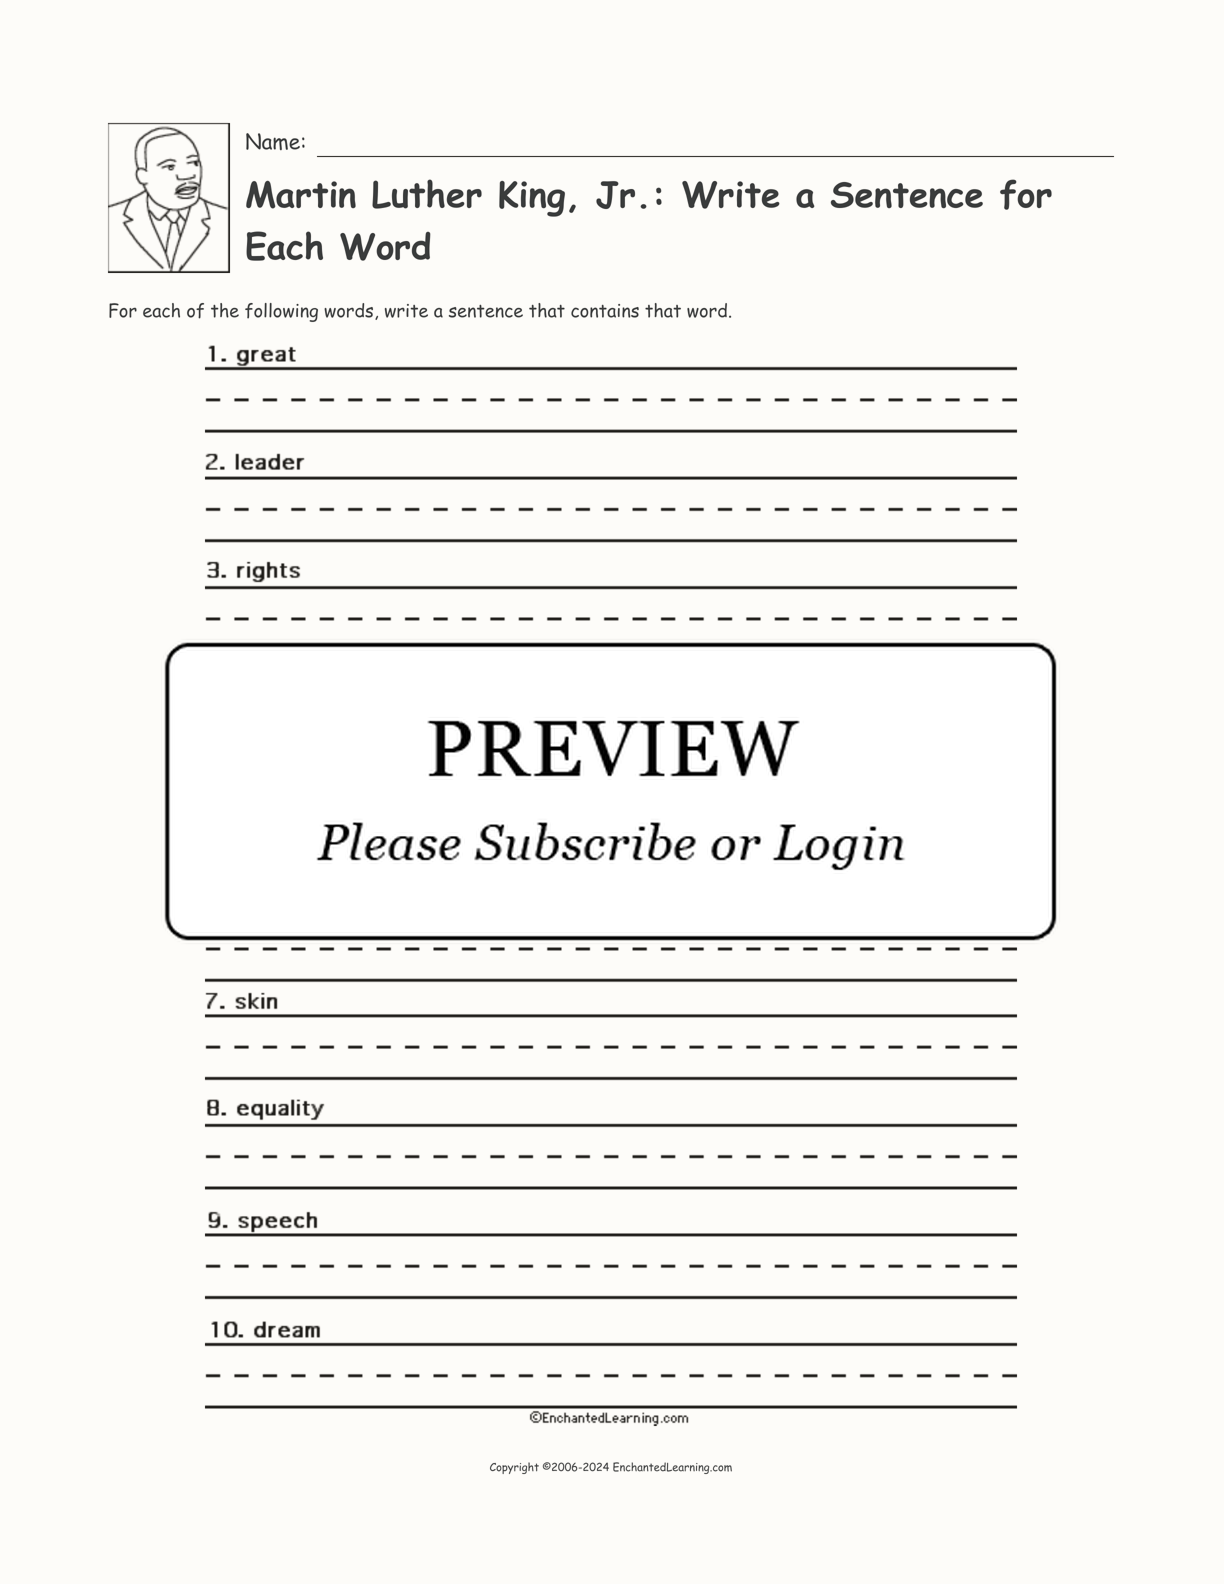 Martin Luther King, Jr.: Write a Sentence for Each Word interactive printout page 1